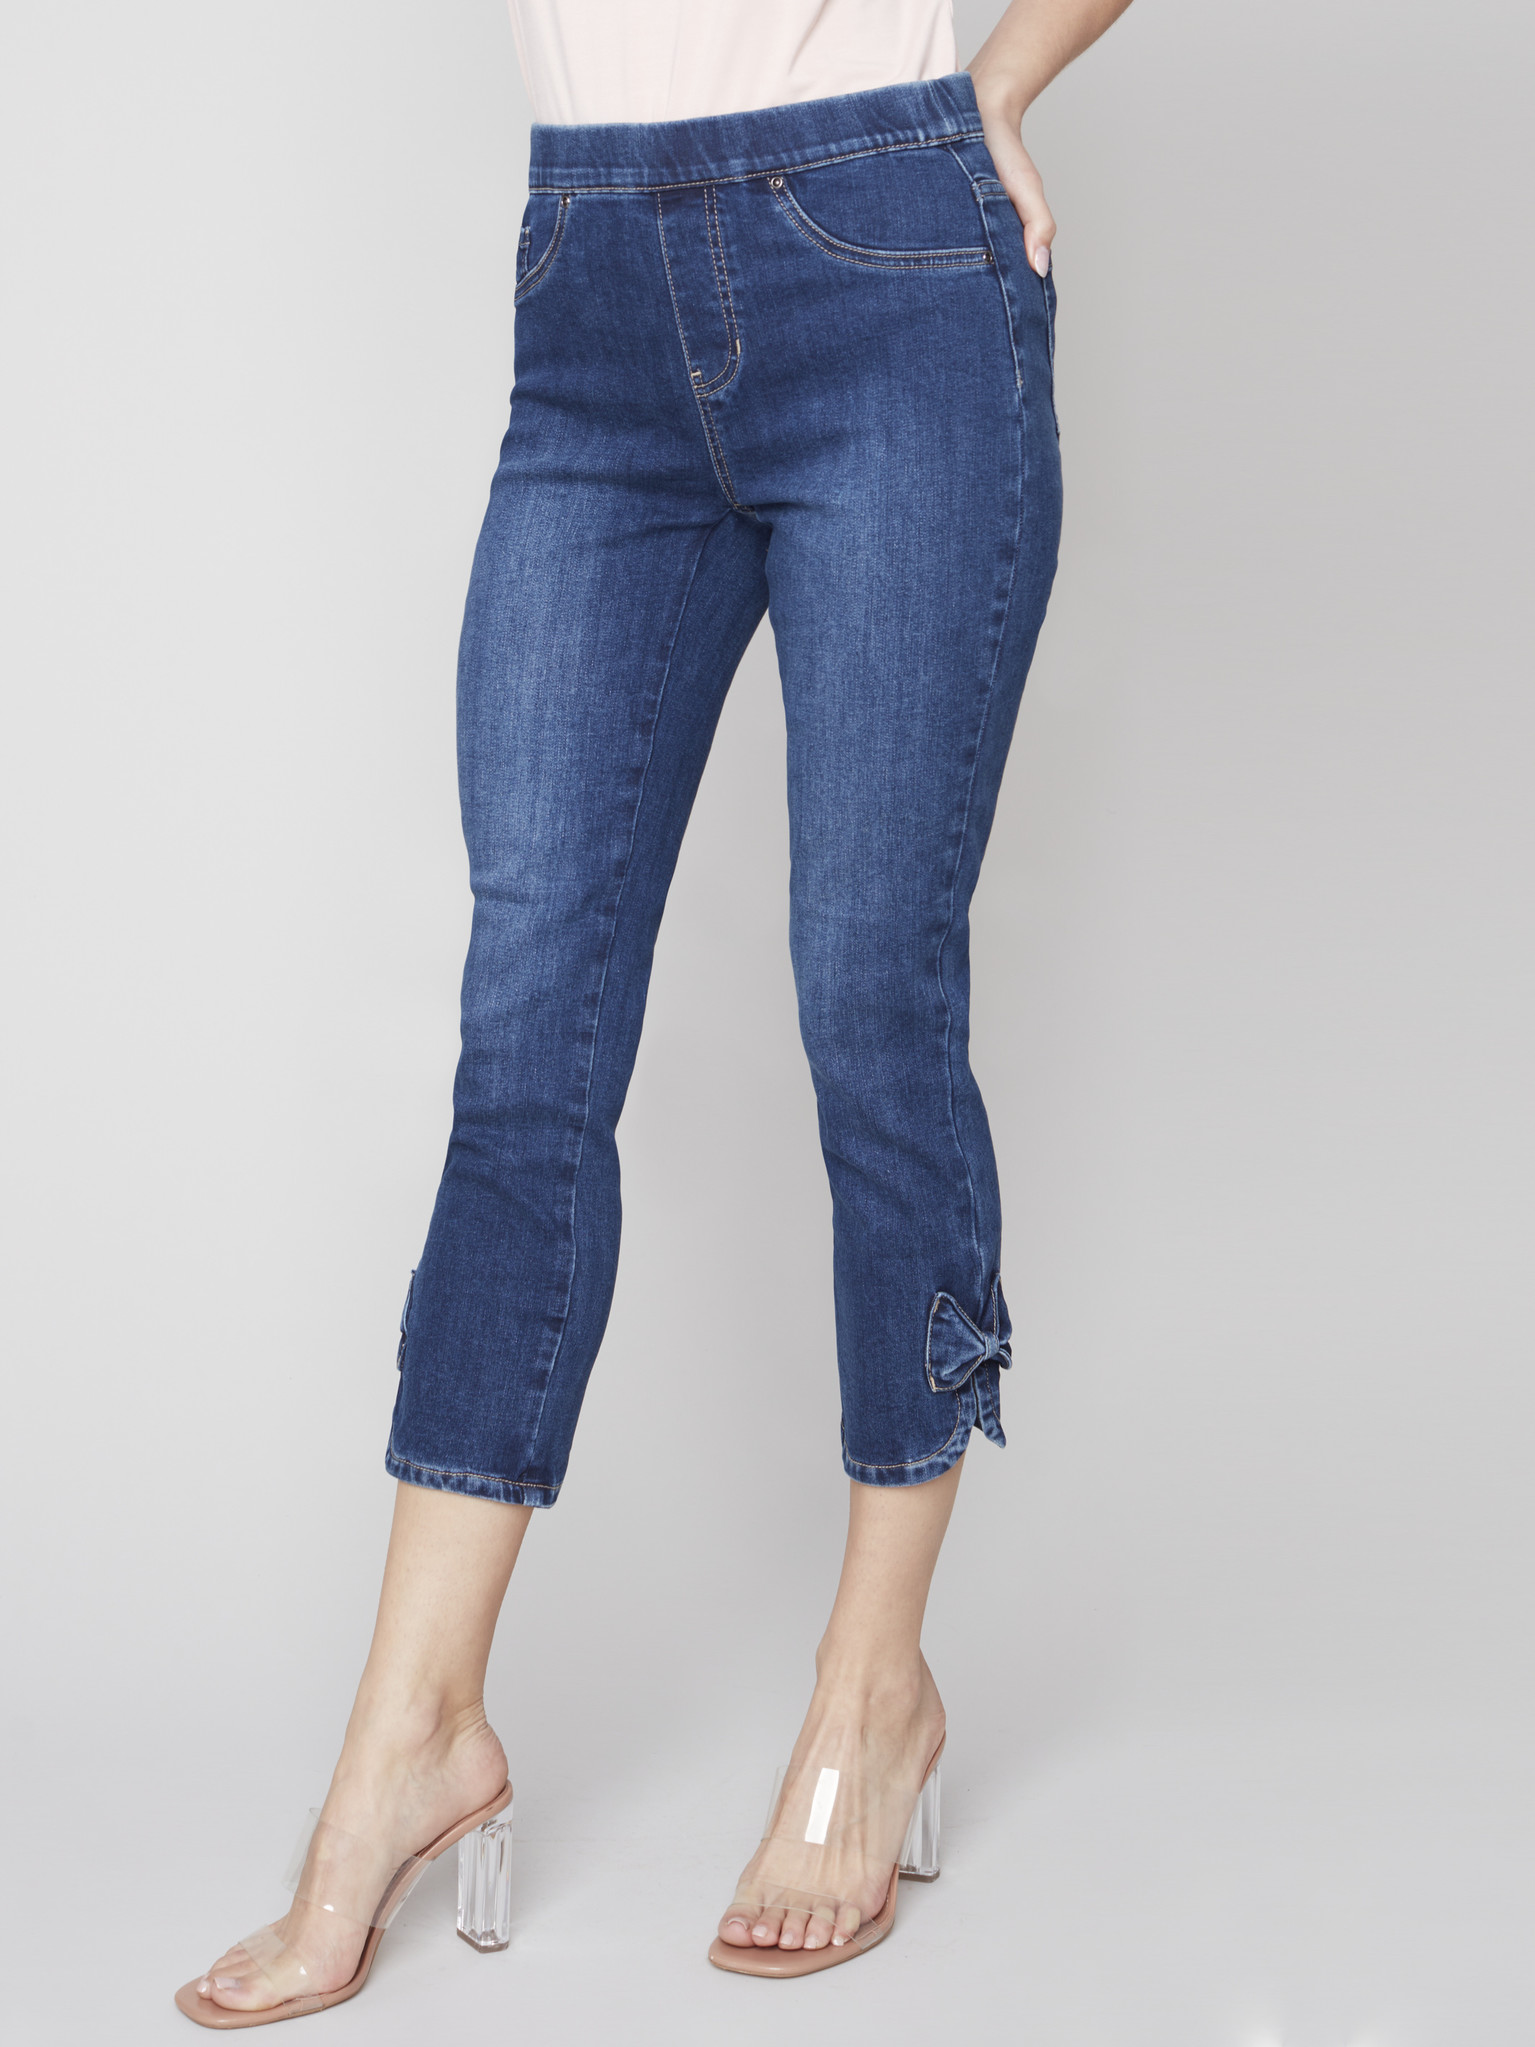 Pull-On Stretch Pant